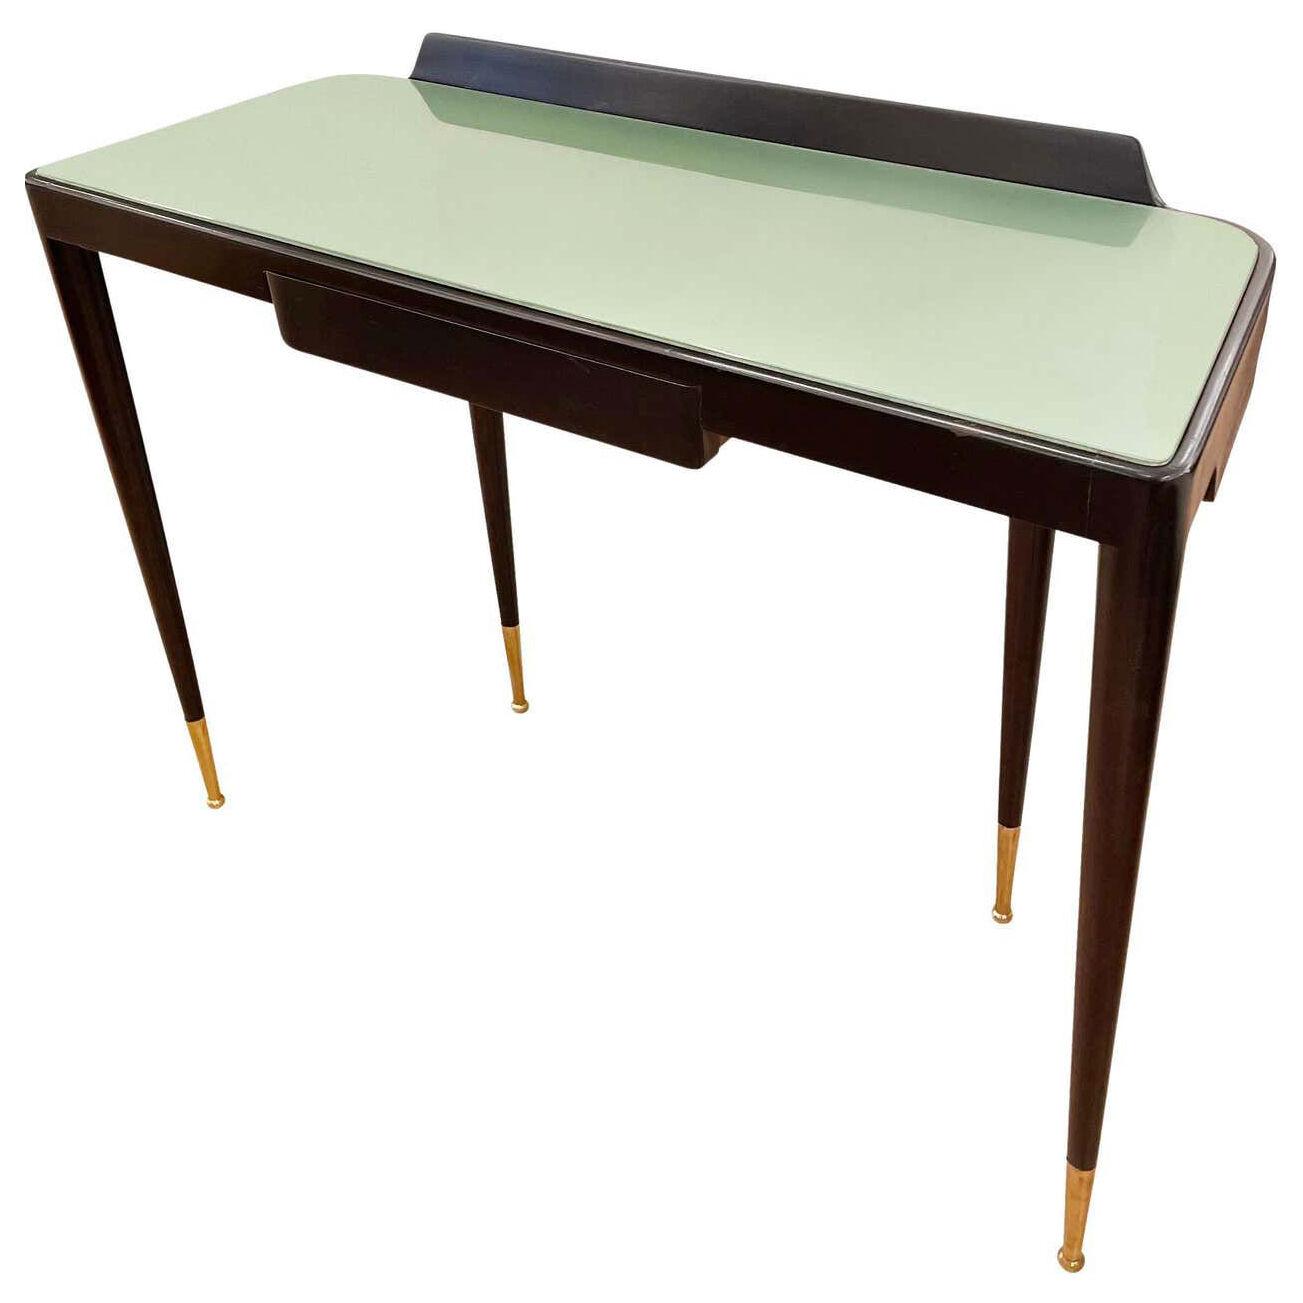 Italian Mid-Century Wood Console with Glass Top